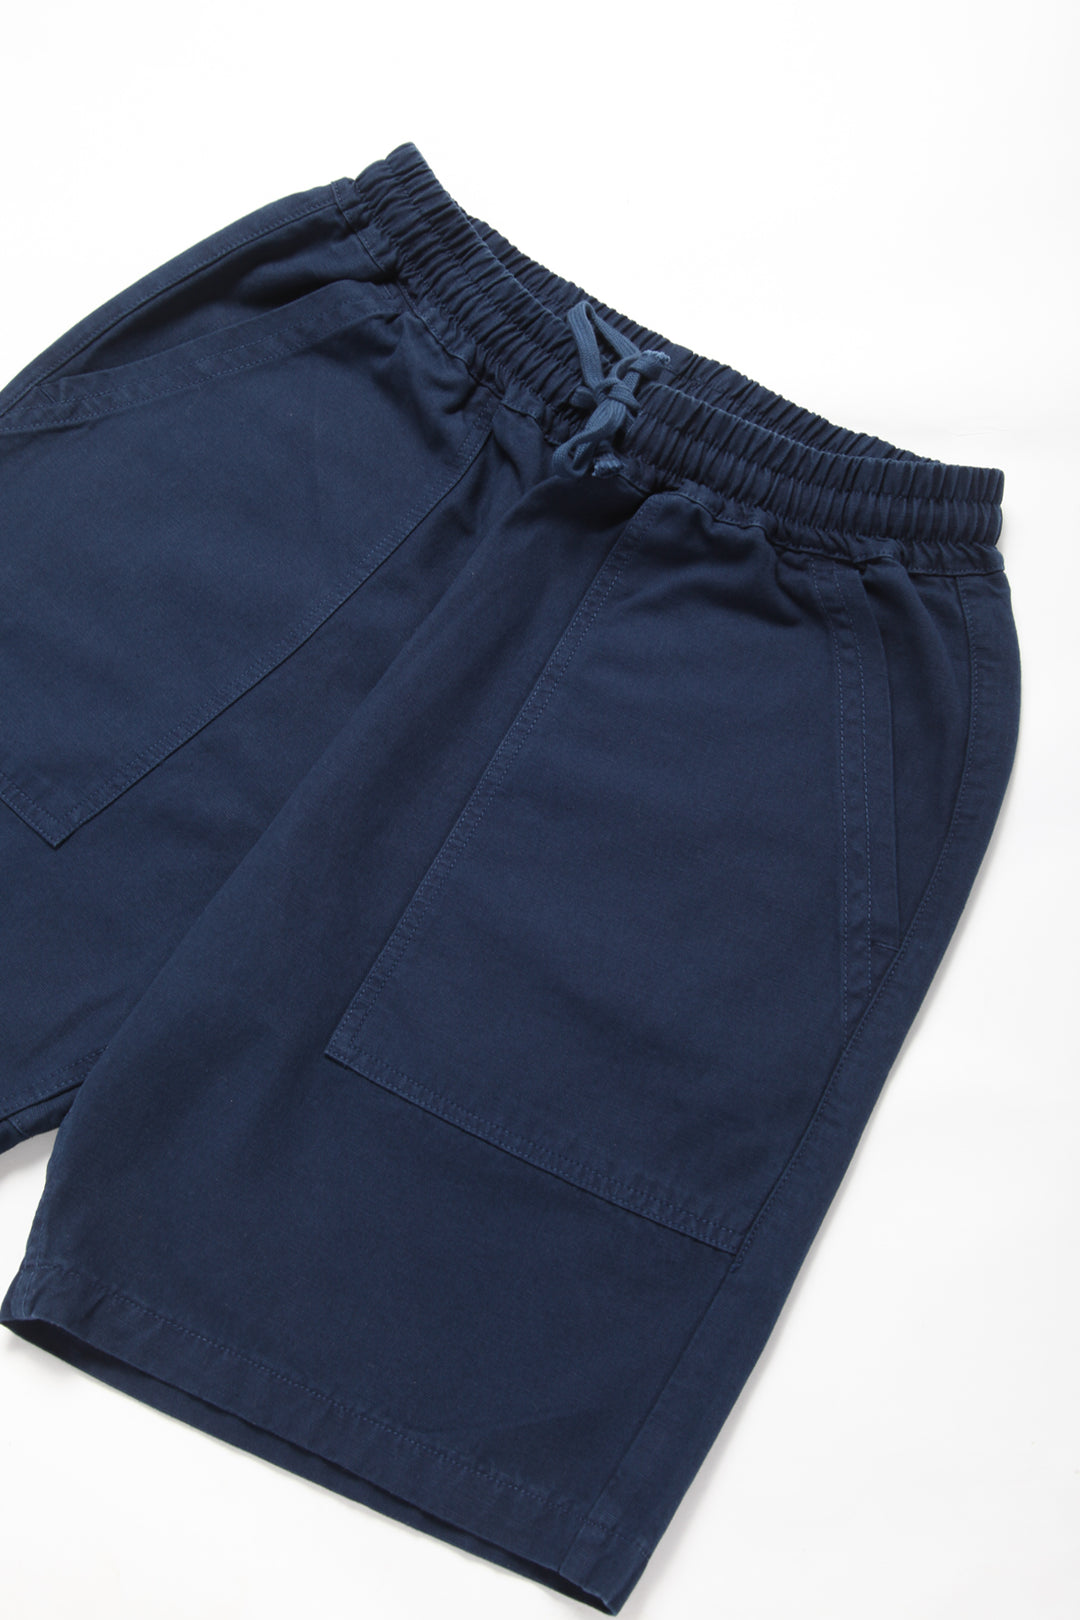 Service Works - Classic Chef Shorts - Navy